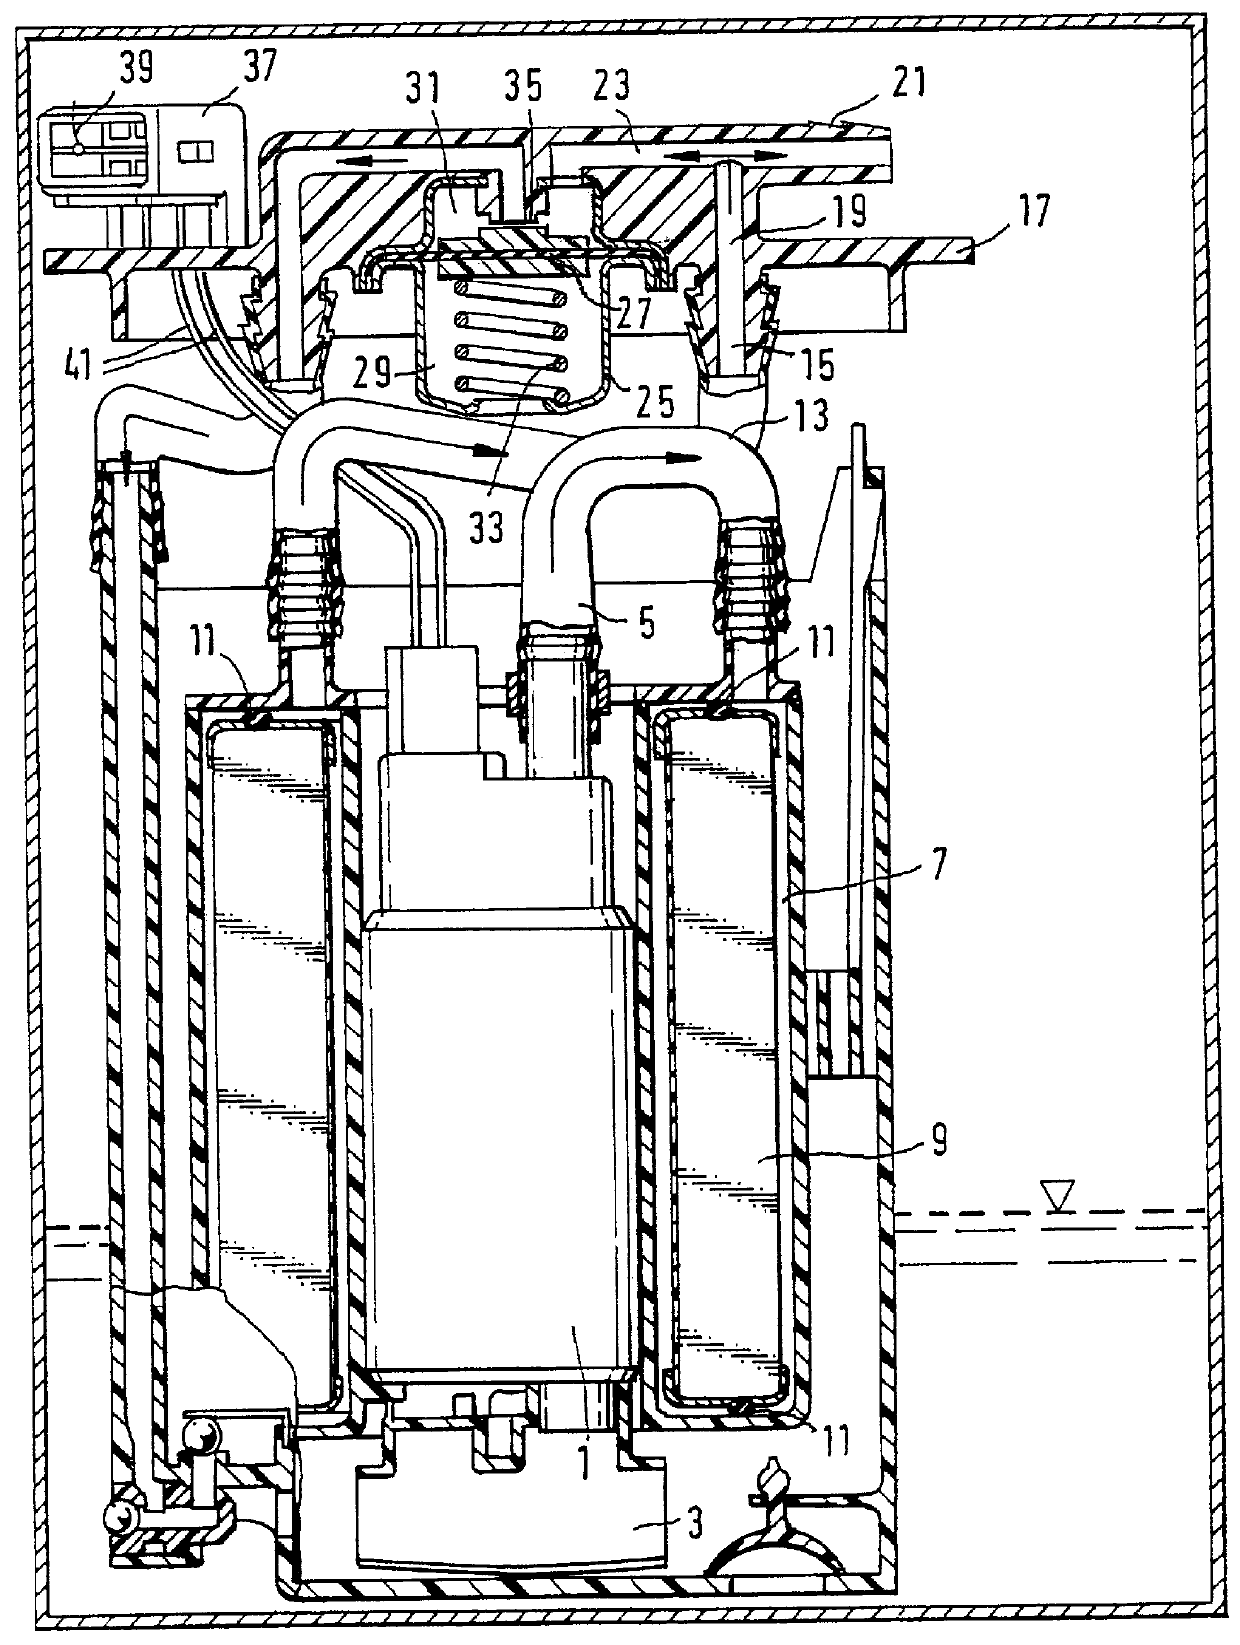 Flange of a fuel delivery module and fuel delivery module